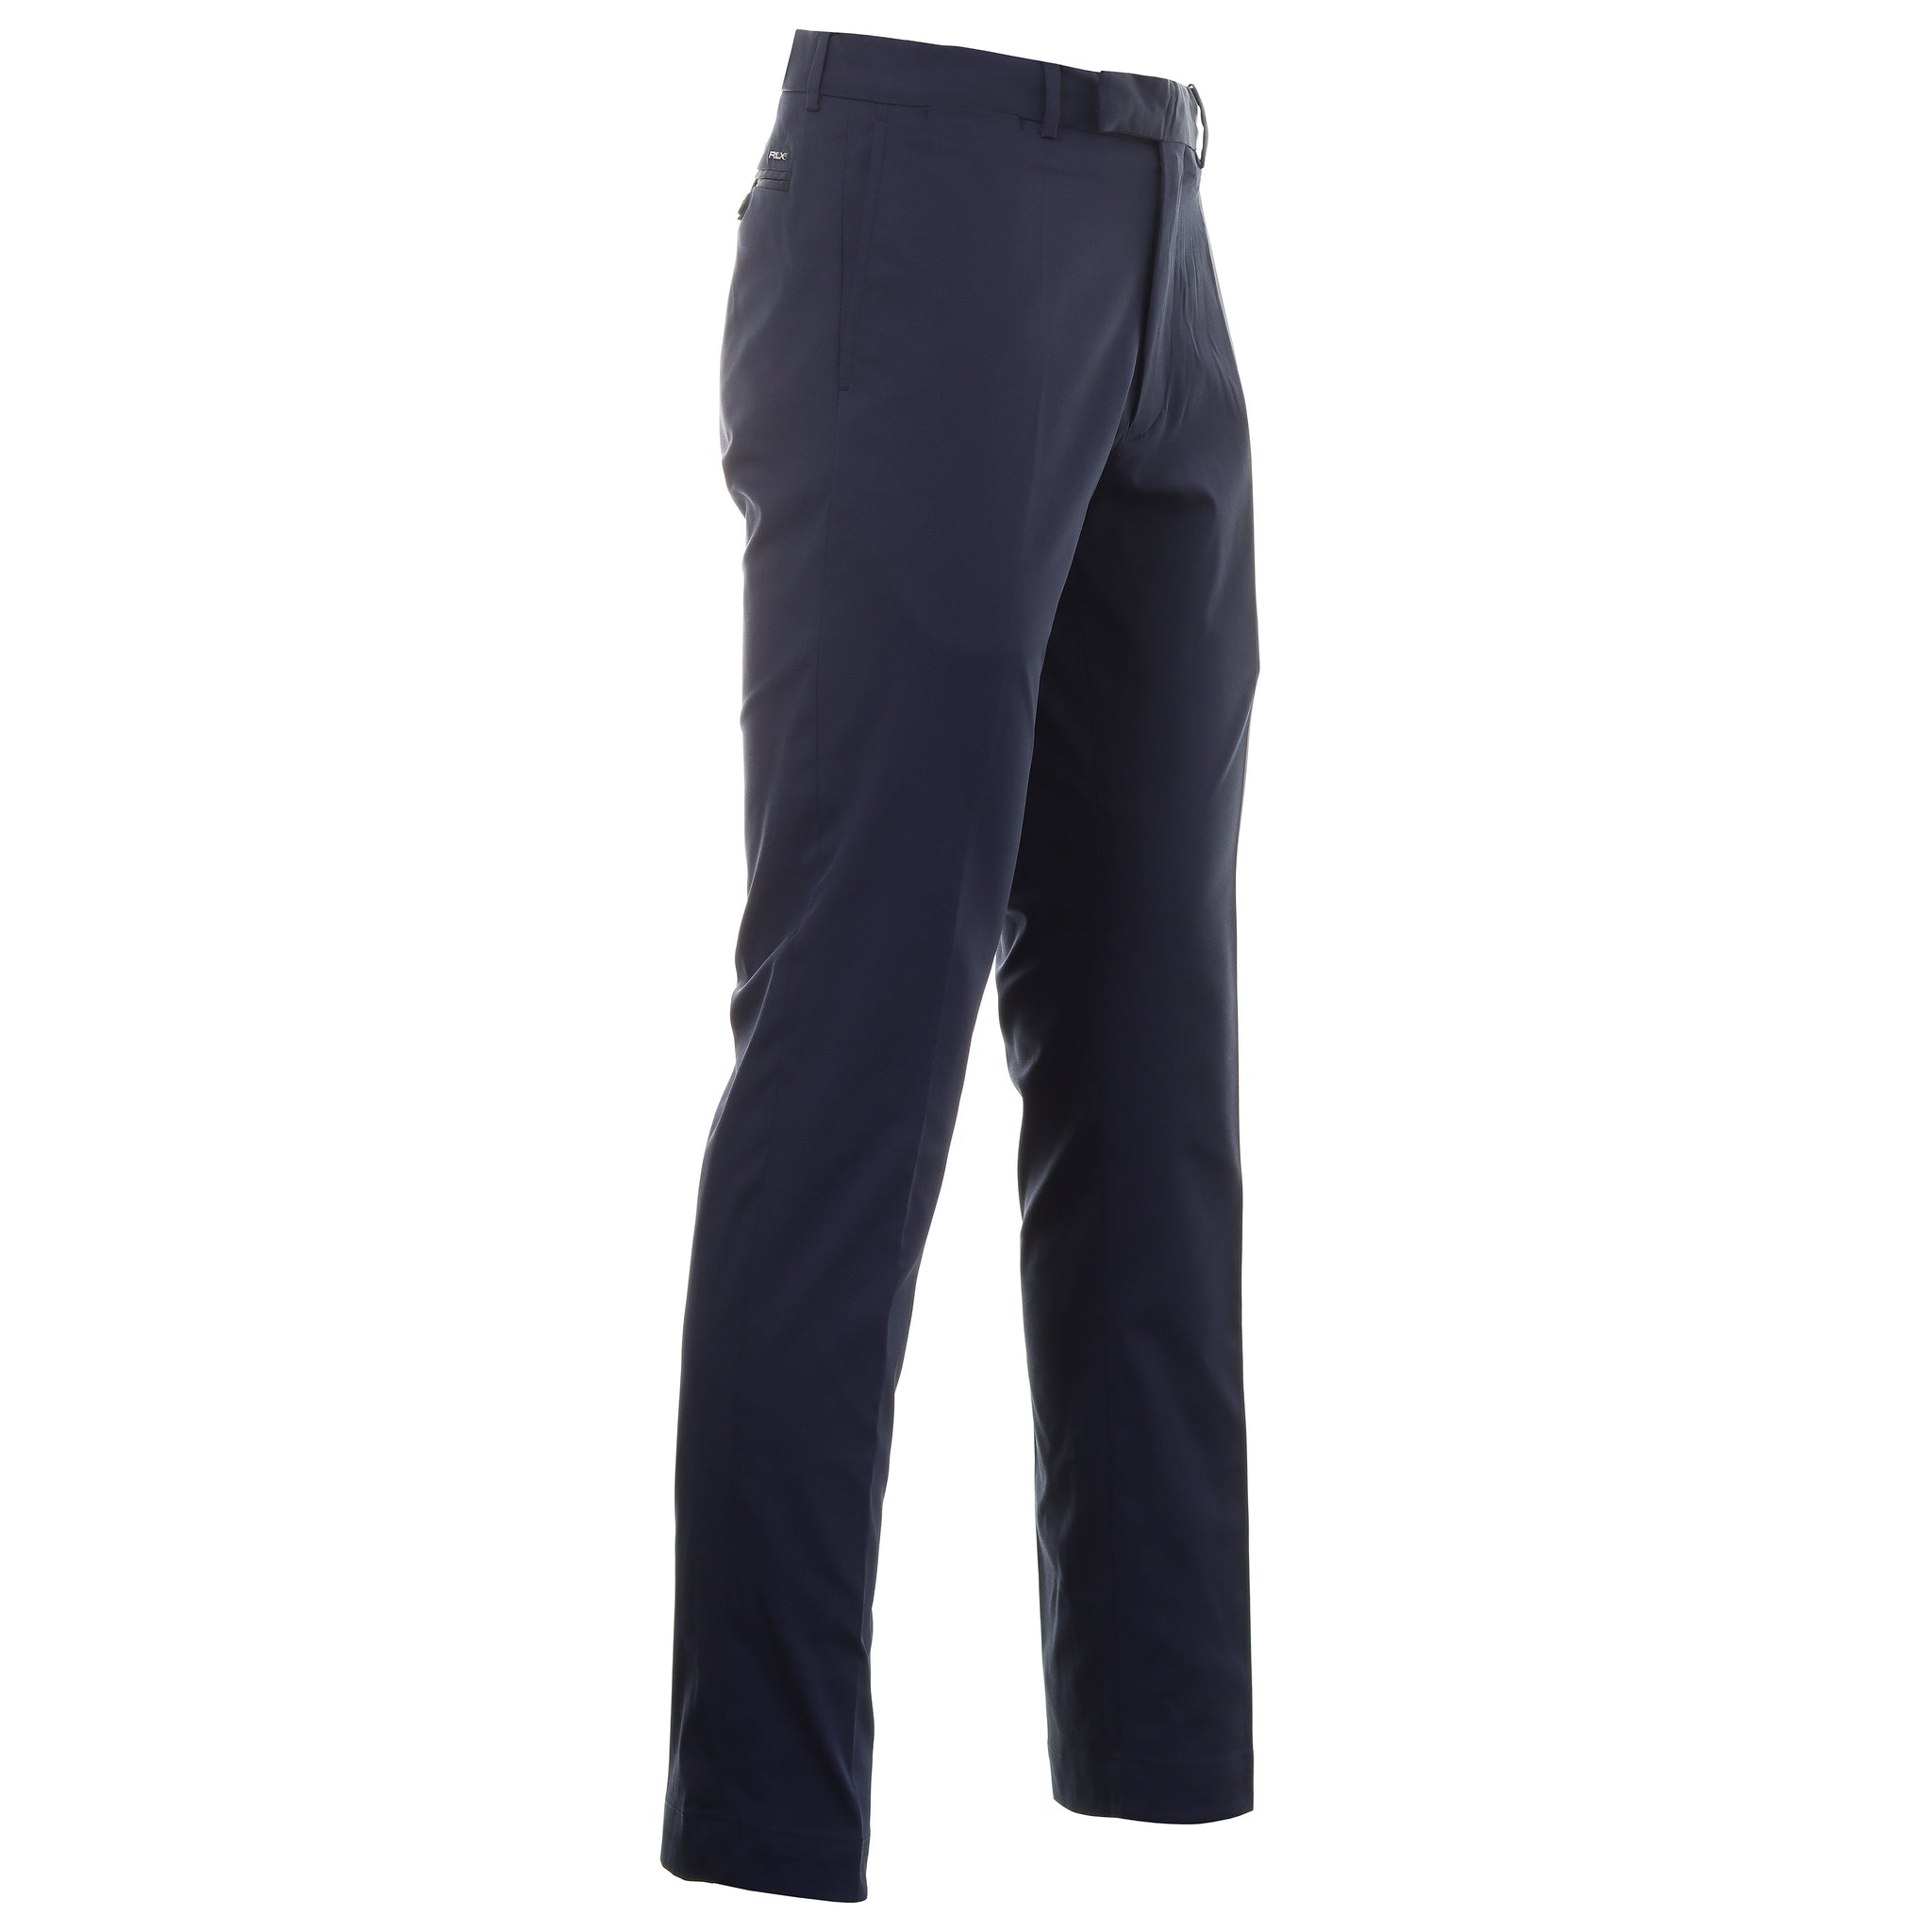 rlx-ralph-lauren-stretch-slim-fit-trousers-785865208-french-navy-001